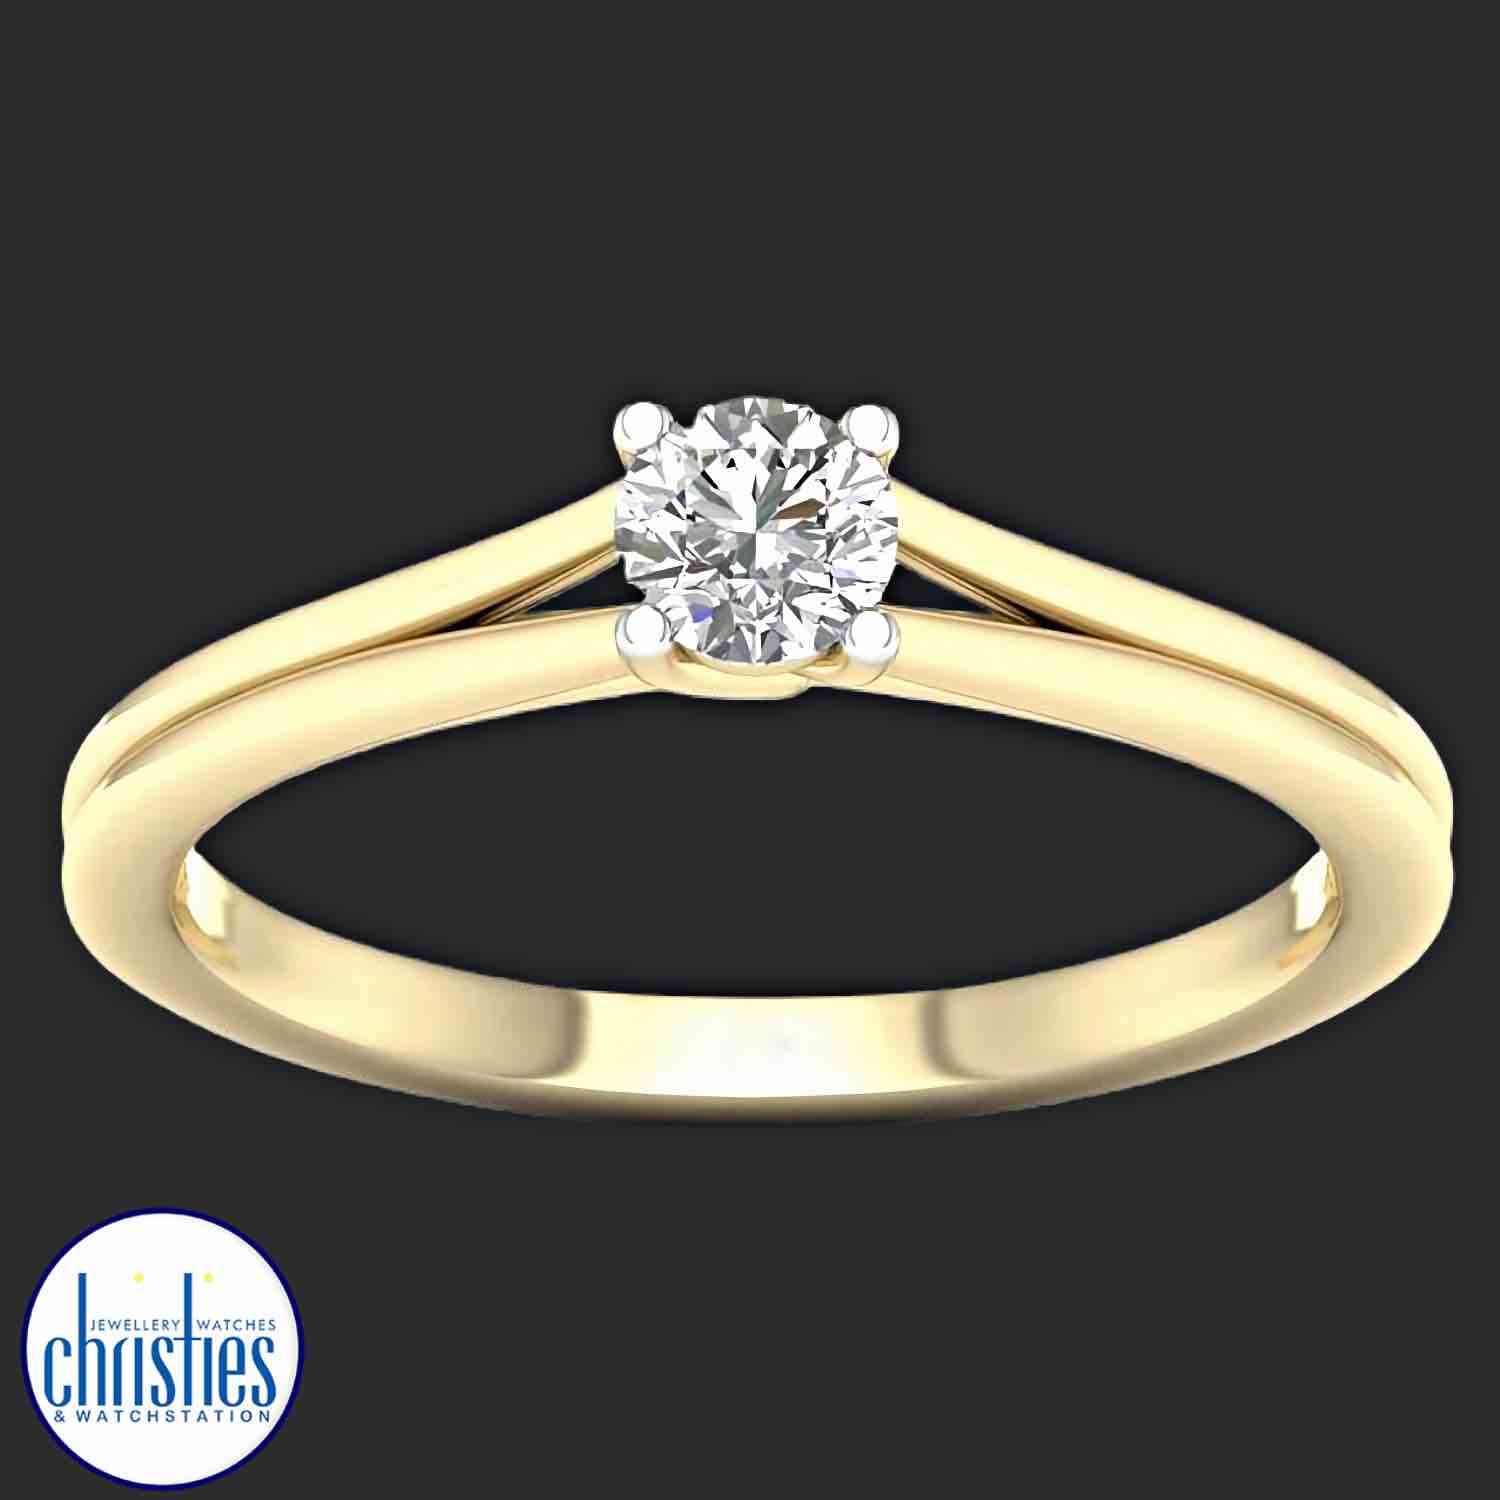 9ct Yellow Gold Diamond Solitaire 0.25ct Ring MSD0471EG. A 9ct yellow gold diamond ring with a total of 0.25ct of diamonds  Afterpay - Split your purchase into 4 instalments - Pay for your purchase over 4 instalments, due every two weeks. You’ll pay your 